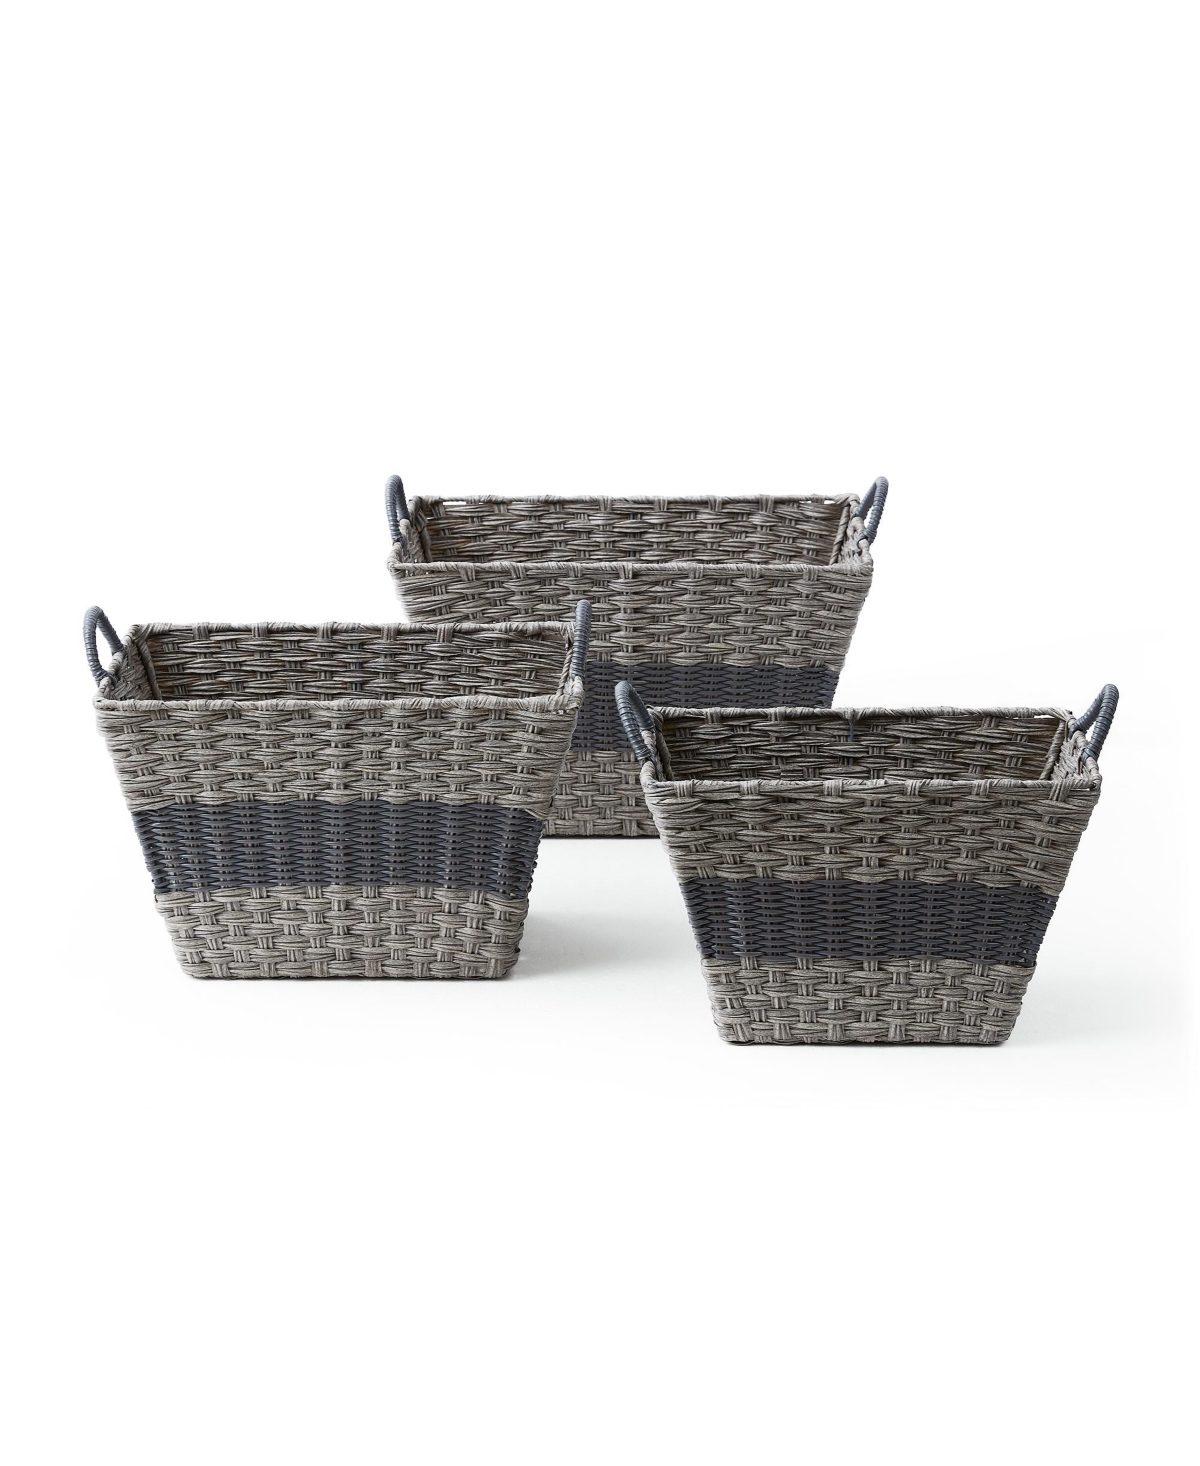 3 Piece Rectangular Faux Wicker Storage Bin Set in Combo Weave with Cut Out Handles - Natural